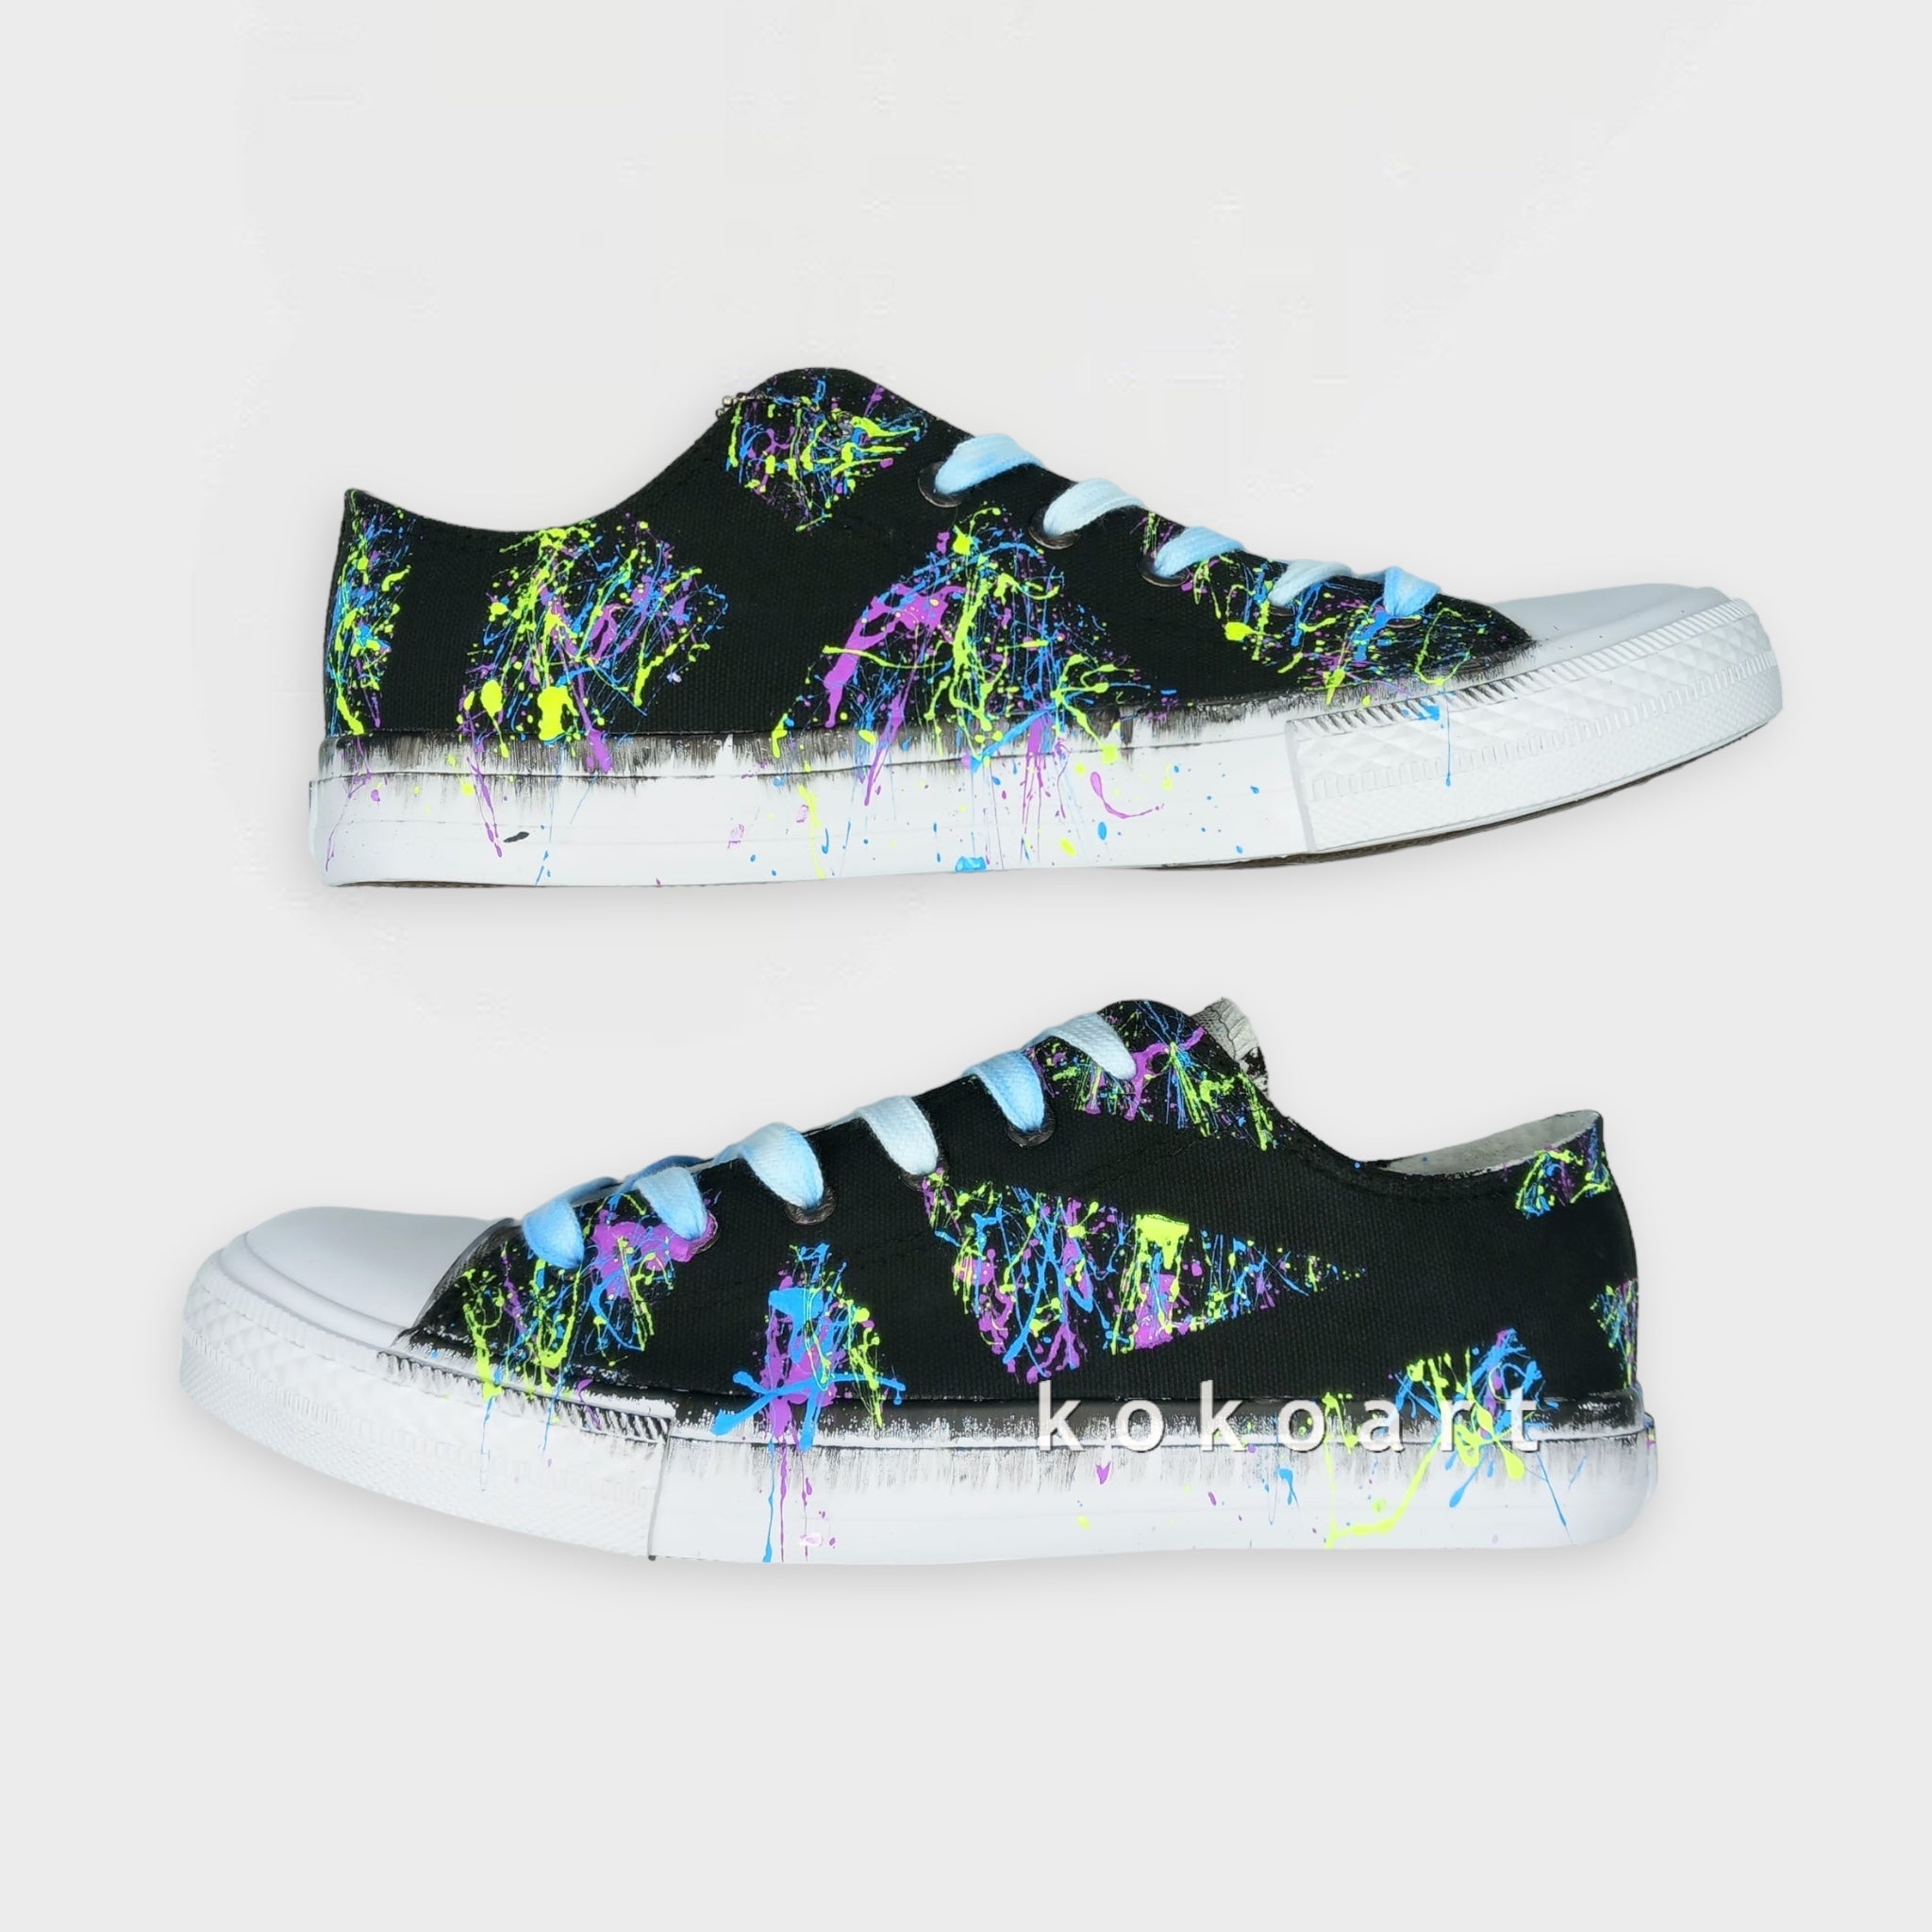 Neon Splatters Hand Painted Shoes